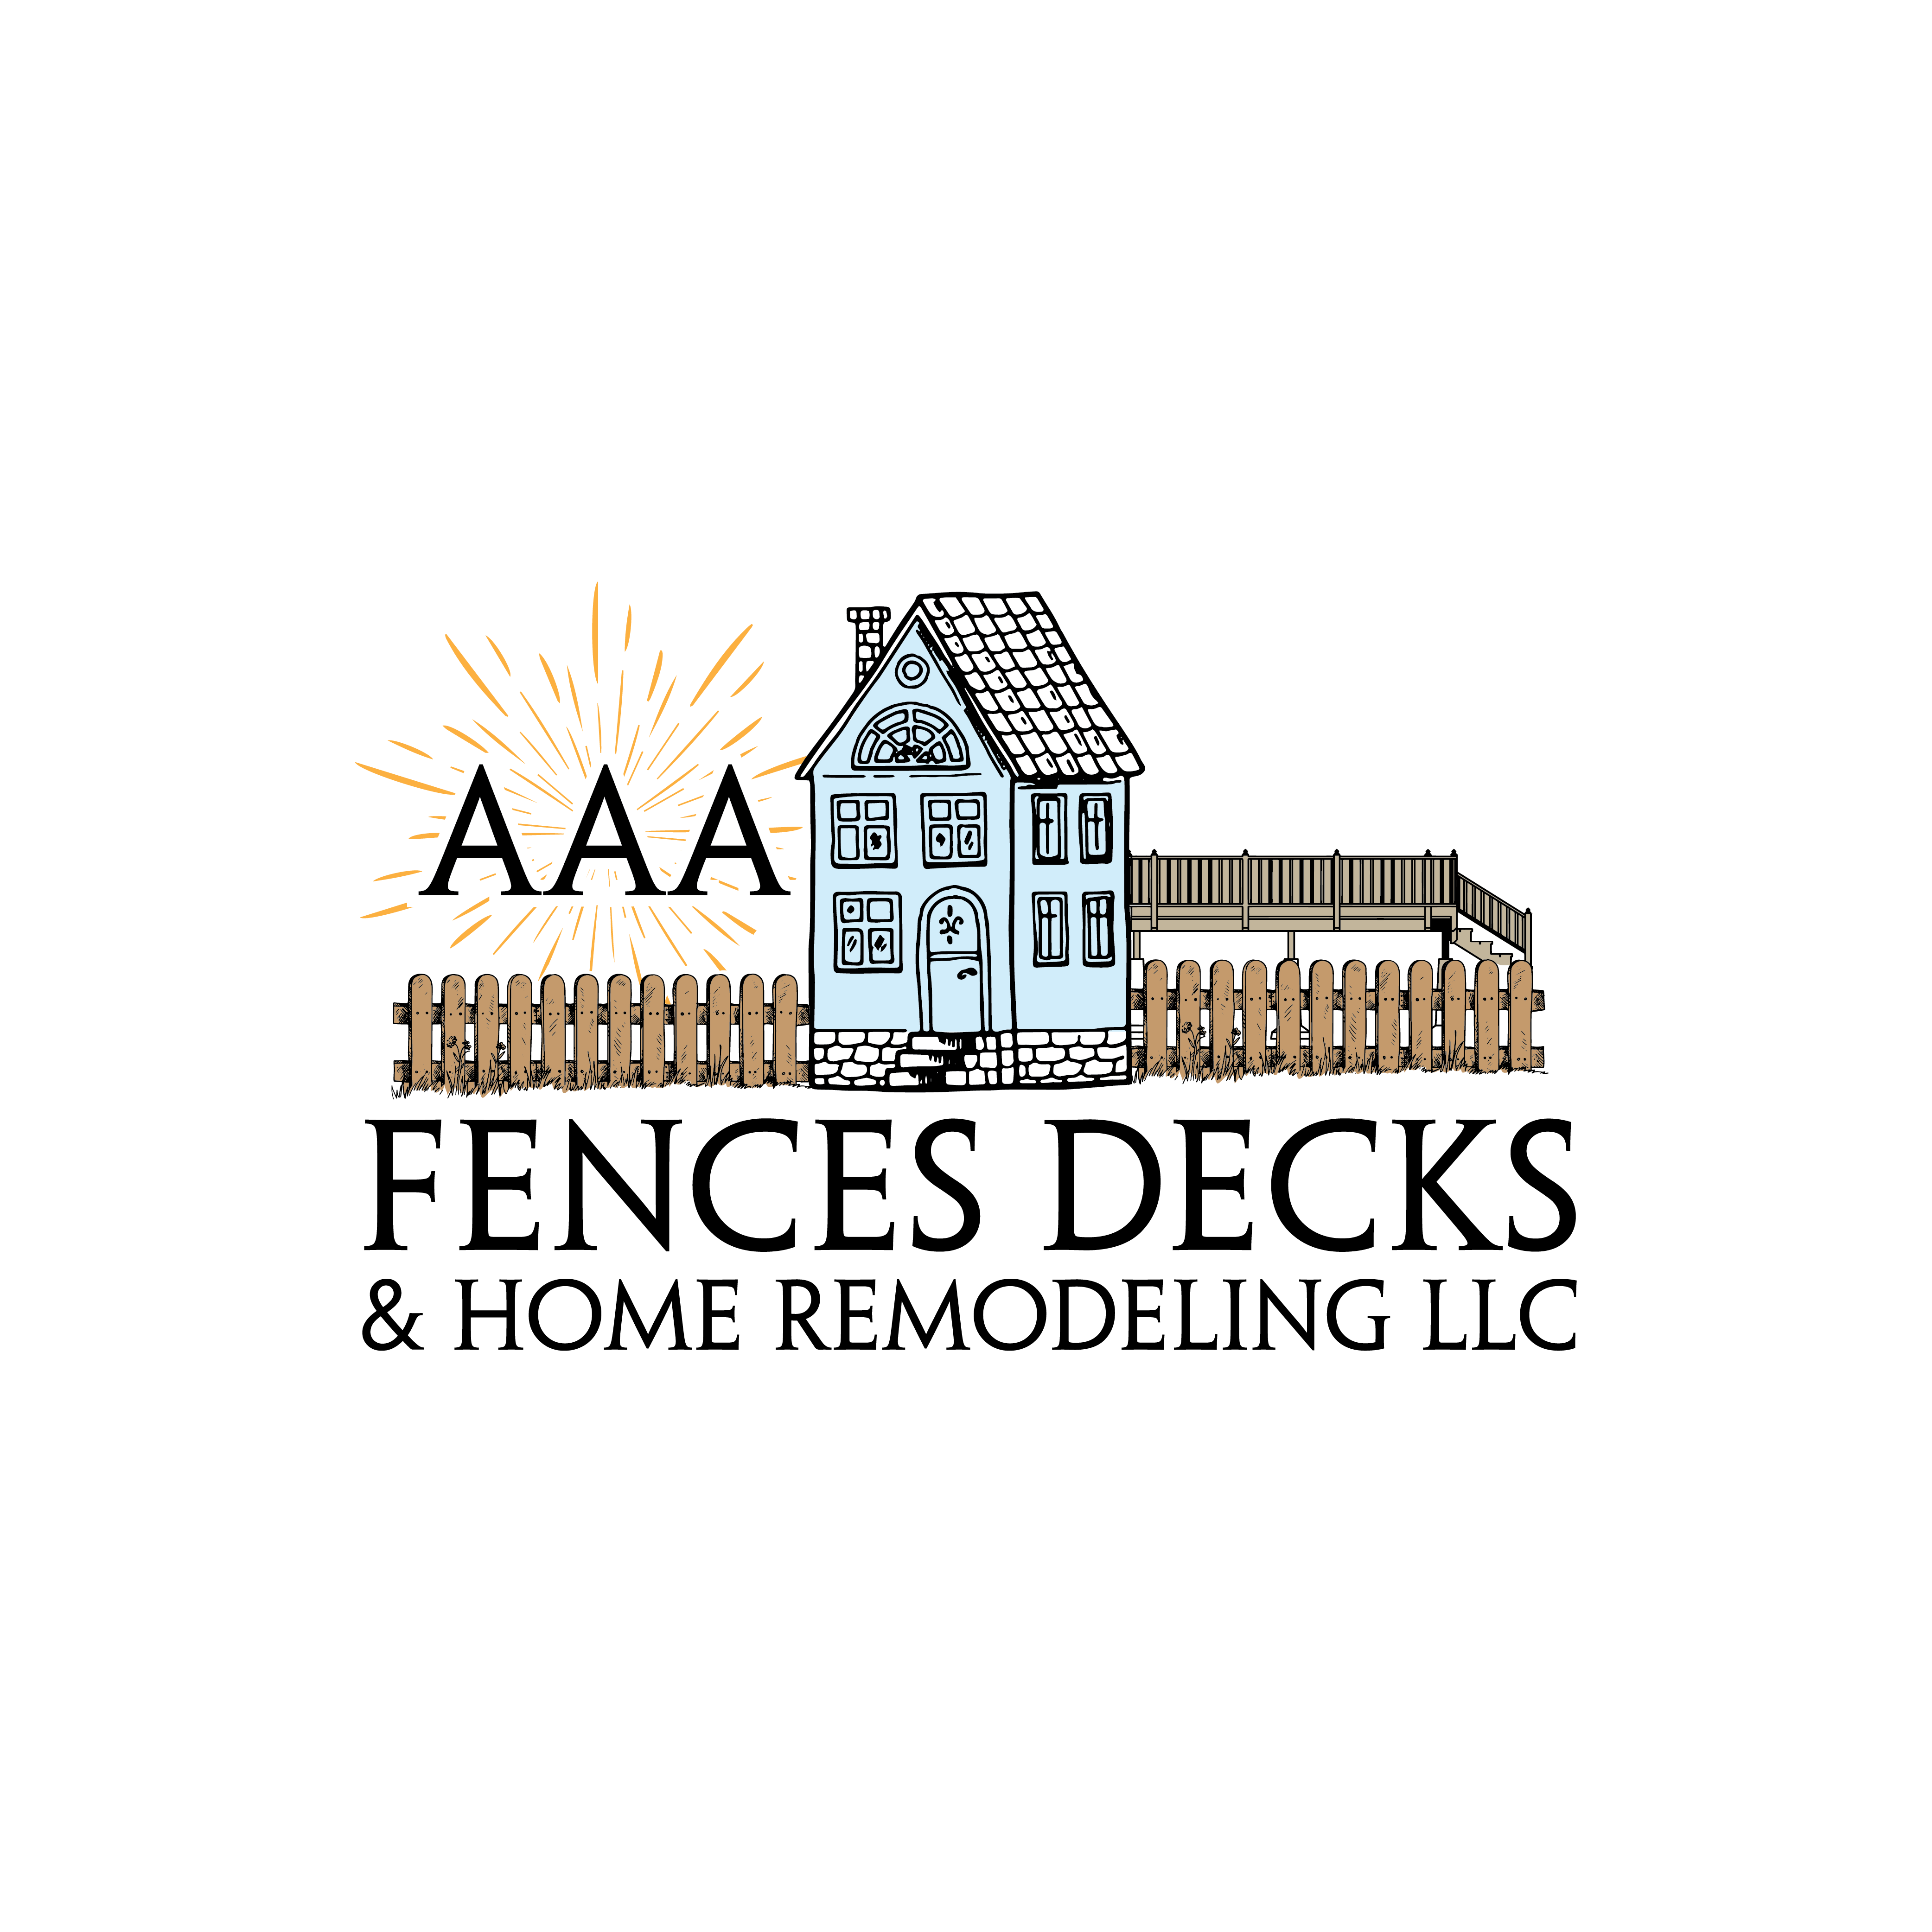 AAA Fences, Decks and Home Remodeling LLC